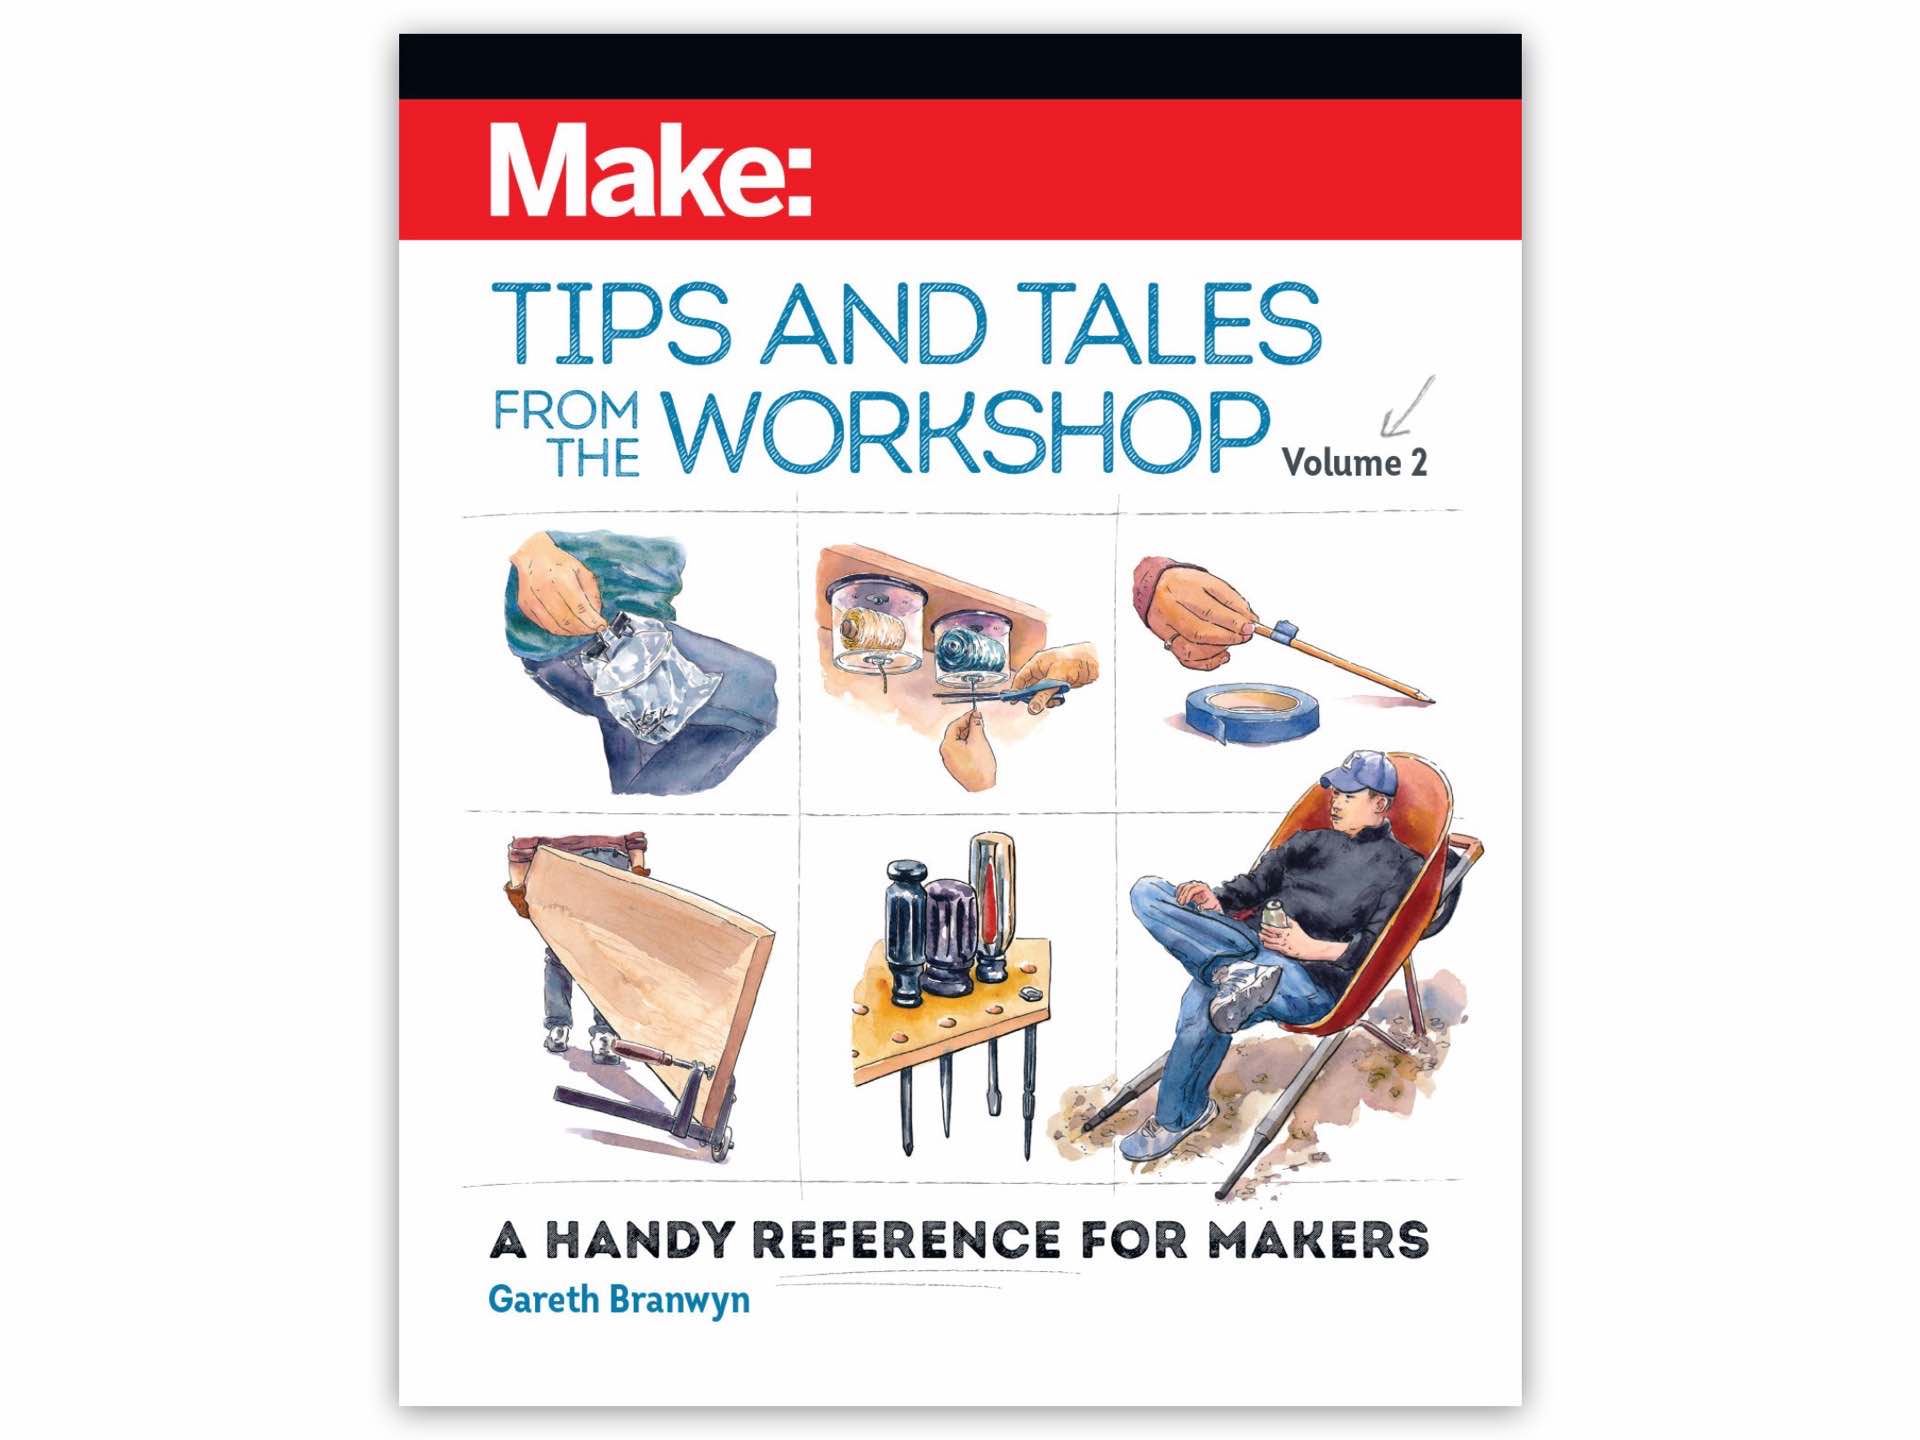 make-tips-and-tales-from-the-workshop-volume-2-by-gareth-branwyn